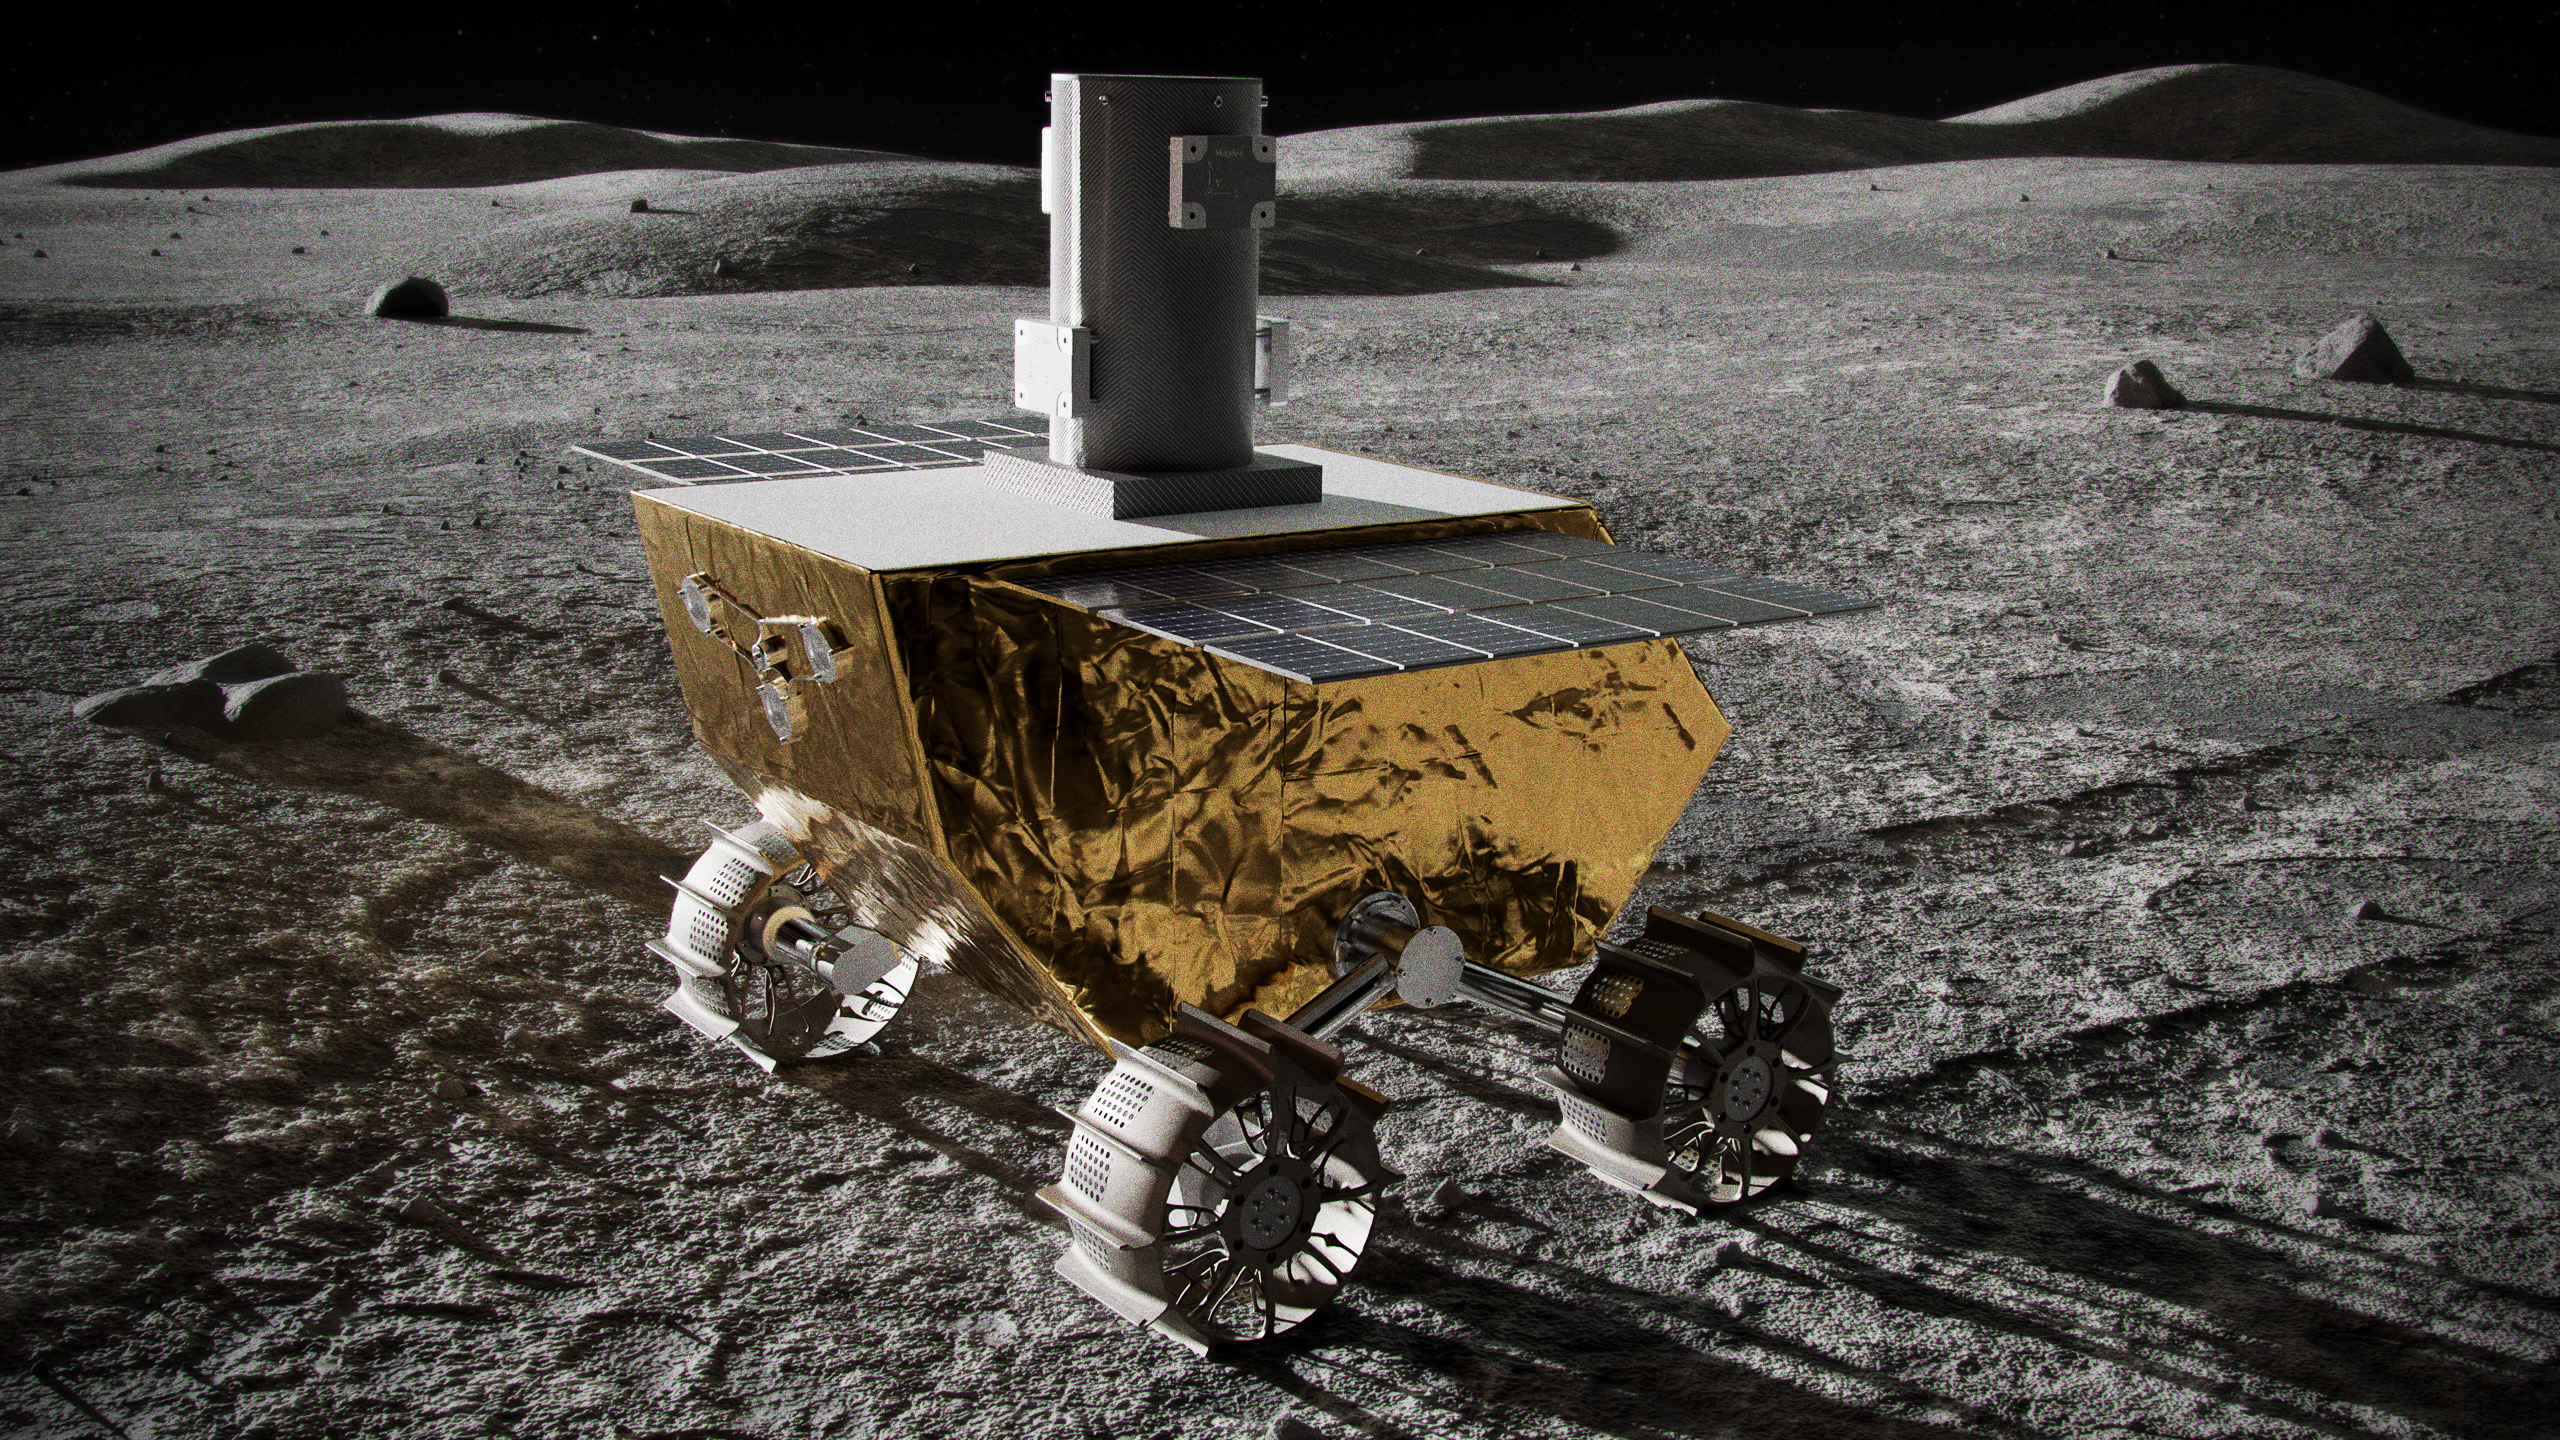 3D graphic of the Lunar Vertex rover on the Moon's surface